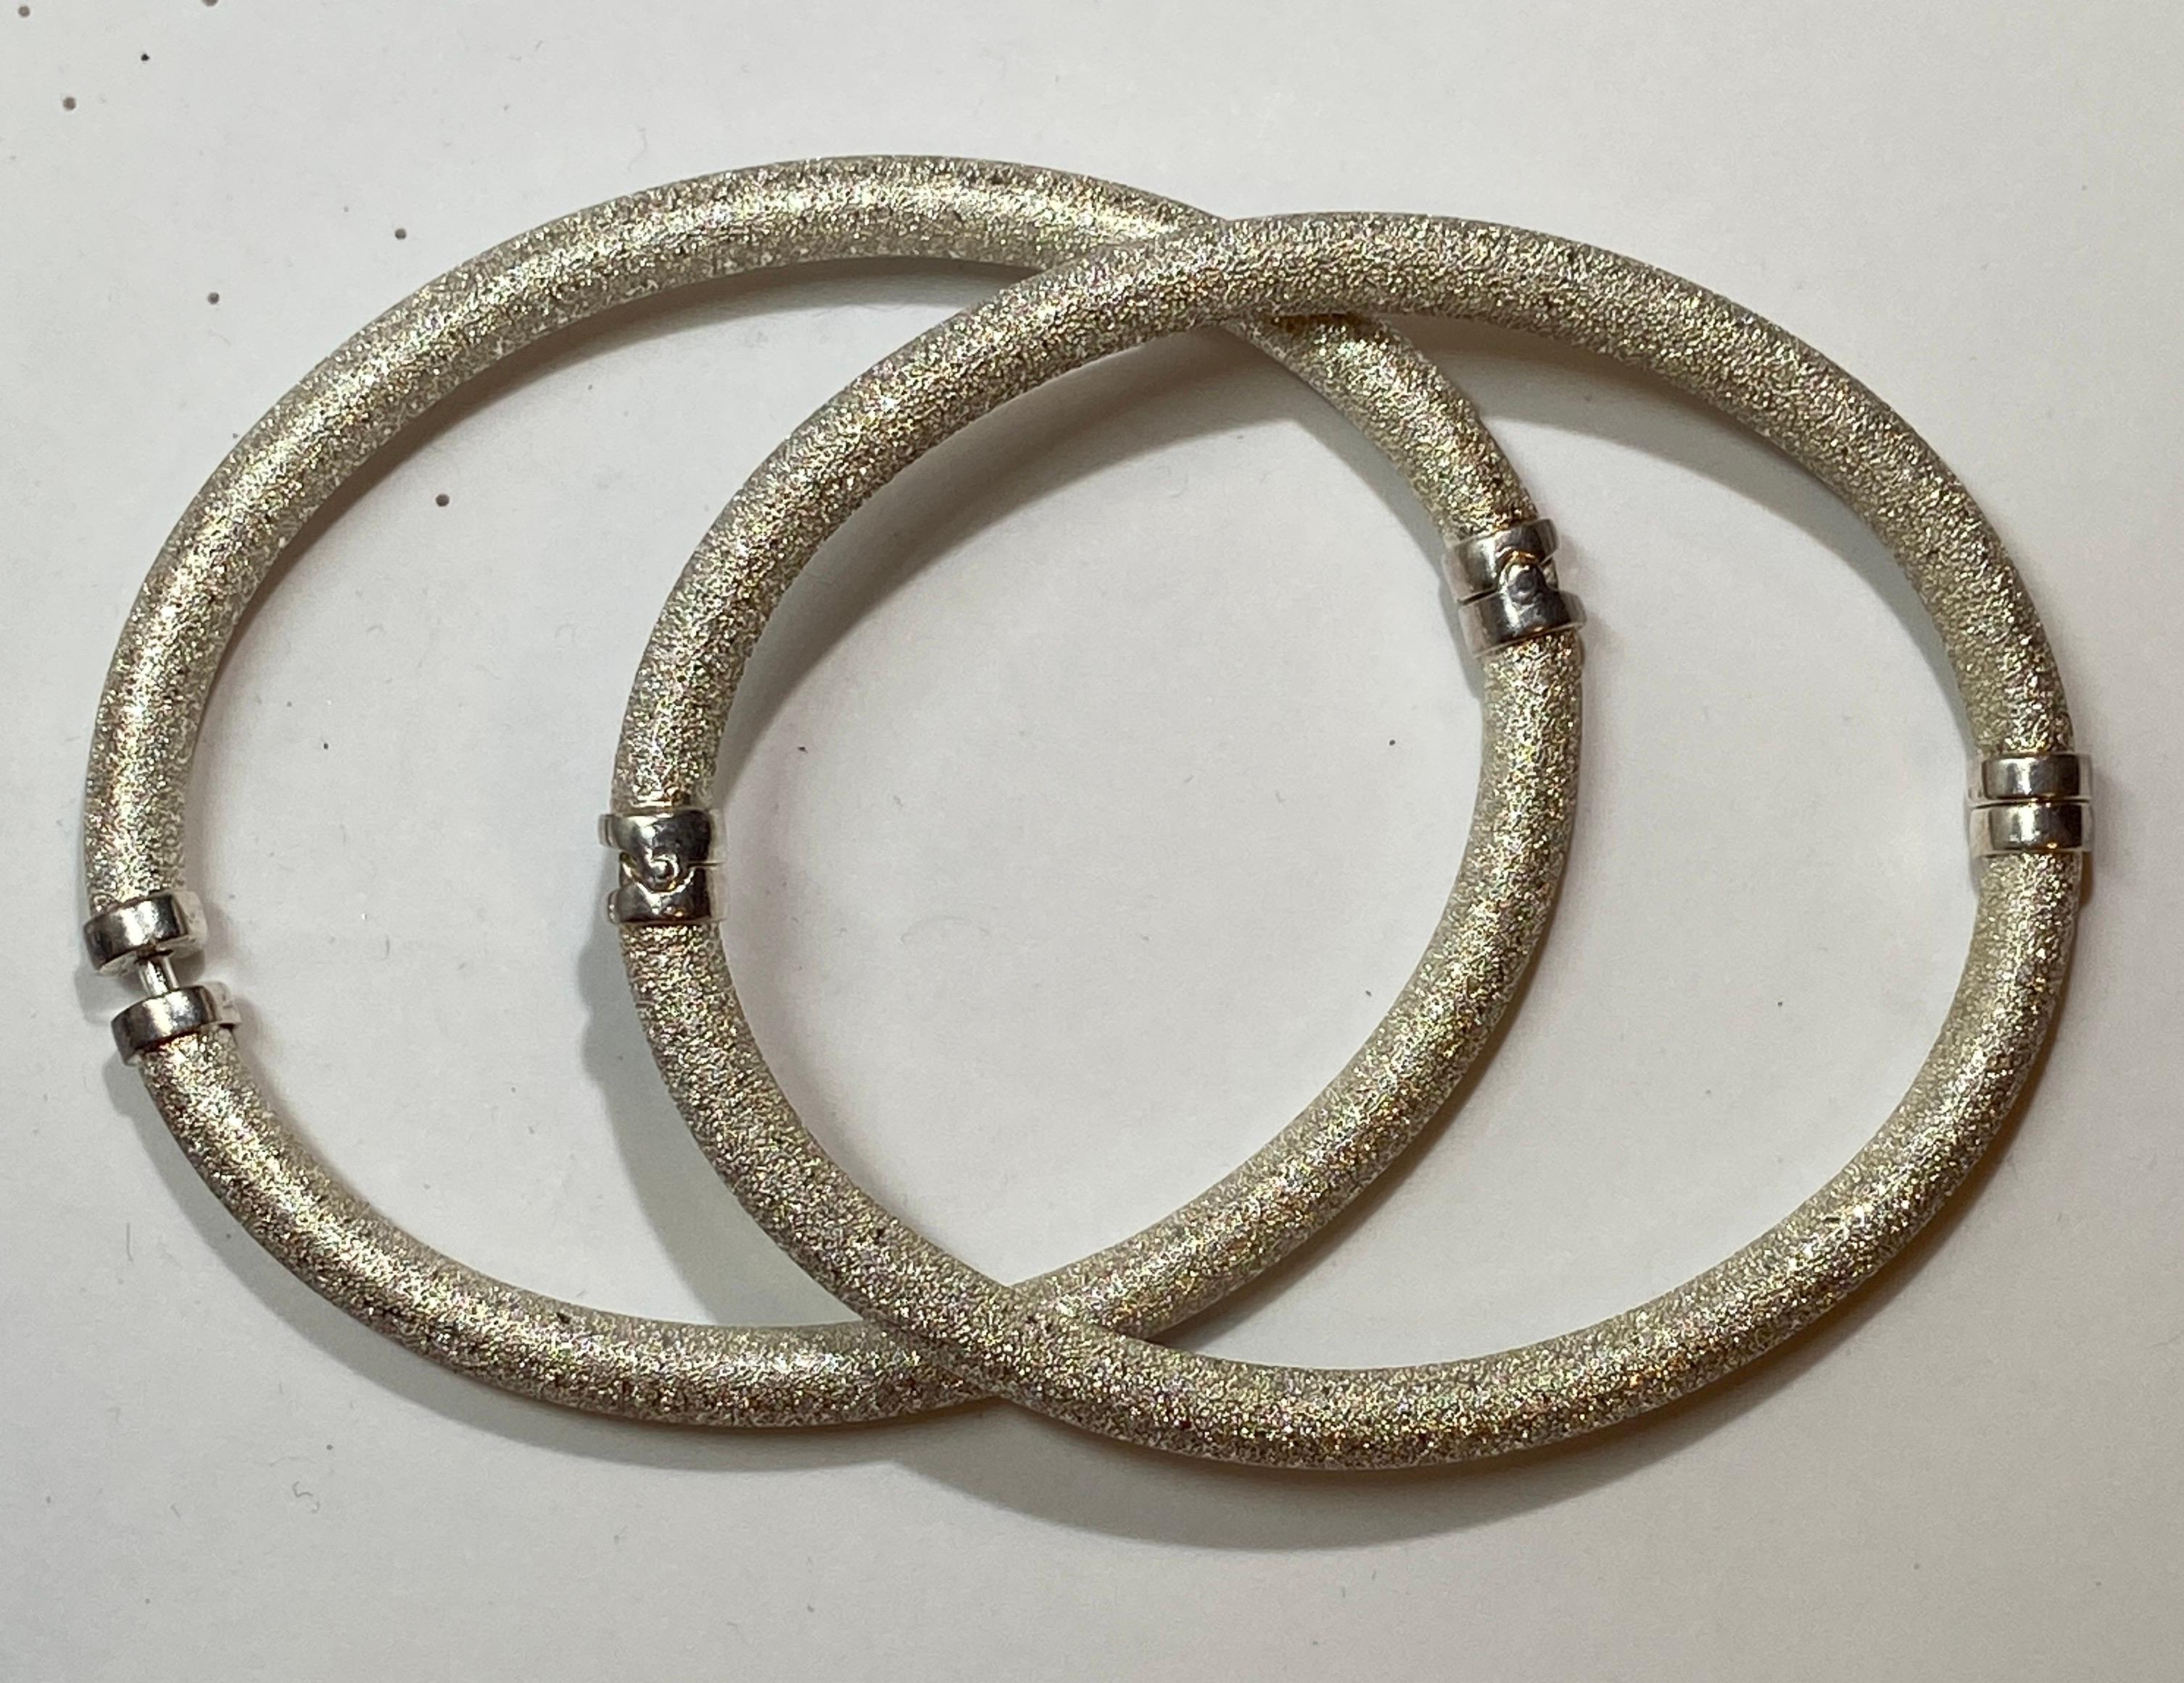 Wonderful set of 2 bracelets in a glittering 'Diamond-Cut' finish in sterling silver, and accented with polished sterling silver at the middle and closings. The closing is fitted with a 'click' clasp. The interior circumference measures 7 1/4